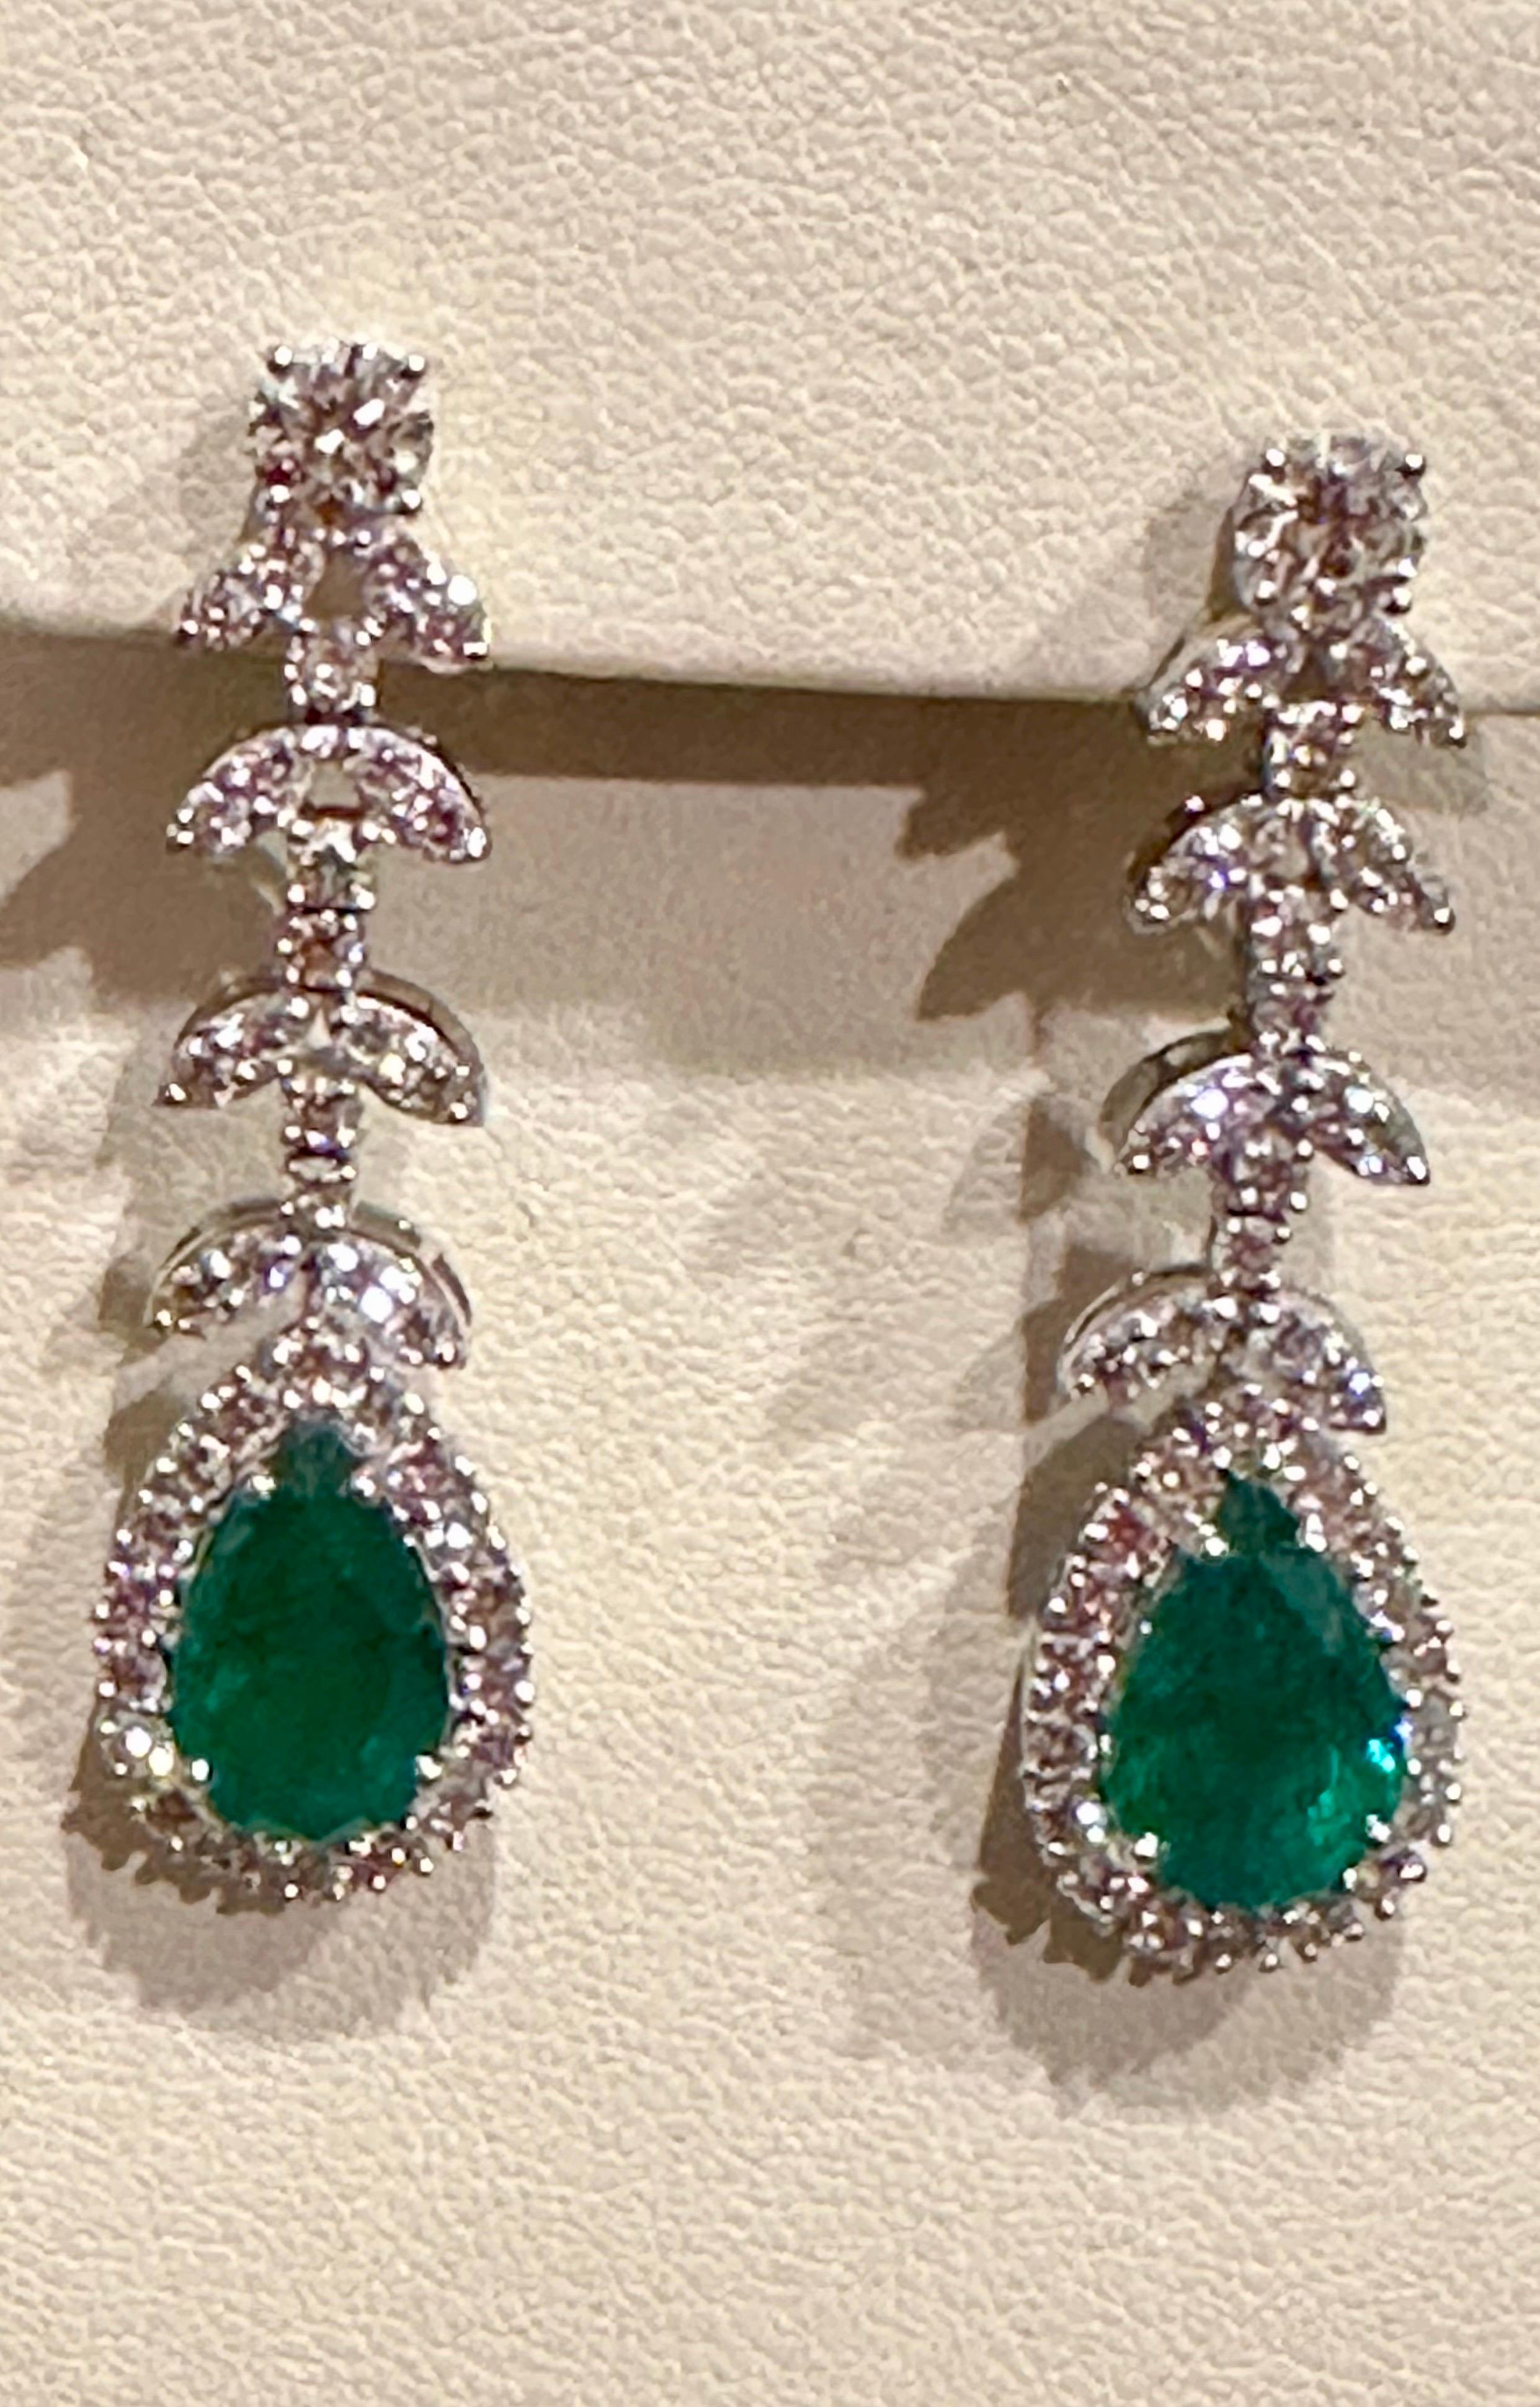 75 Ct Zambian Emerald and 30 Ct Diamond Necklace and Earring Bridal Suite For Sale 5